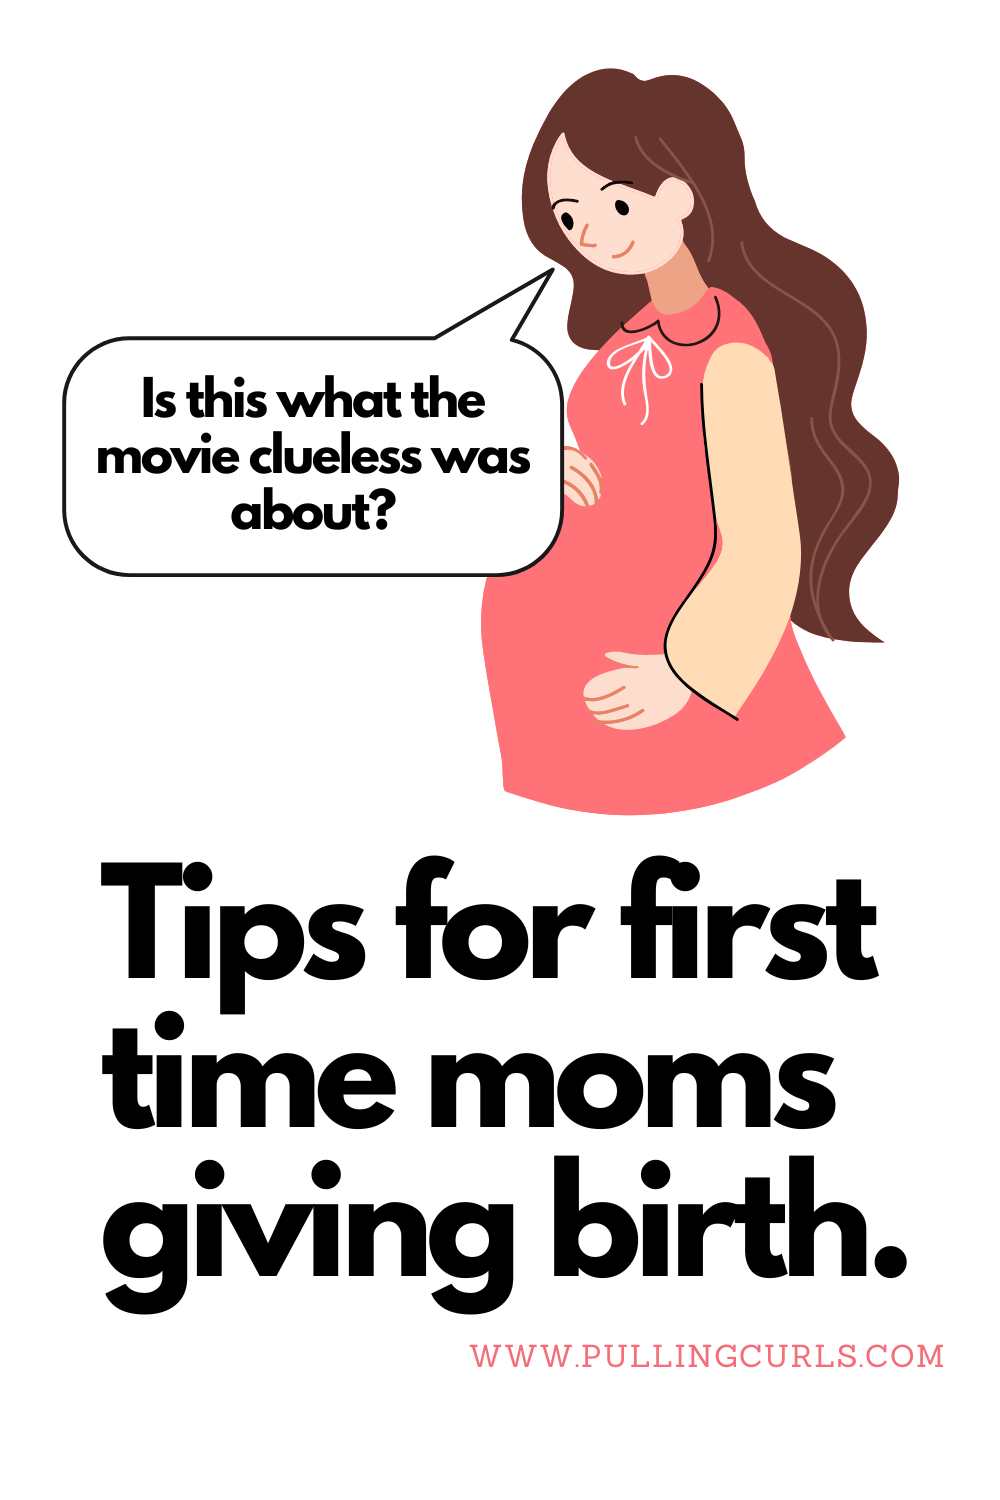 pregnant woman saying "is this what the movie clueless was about?" // tips for firs ttime moms giving birth via @pullingcurls